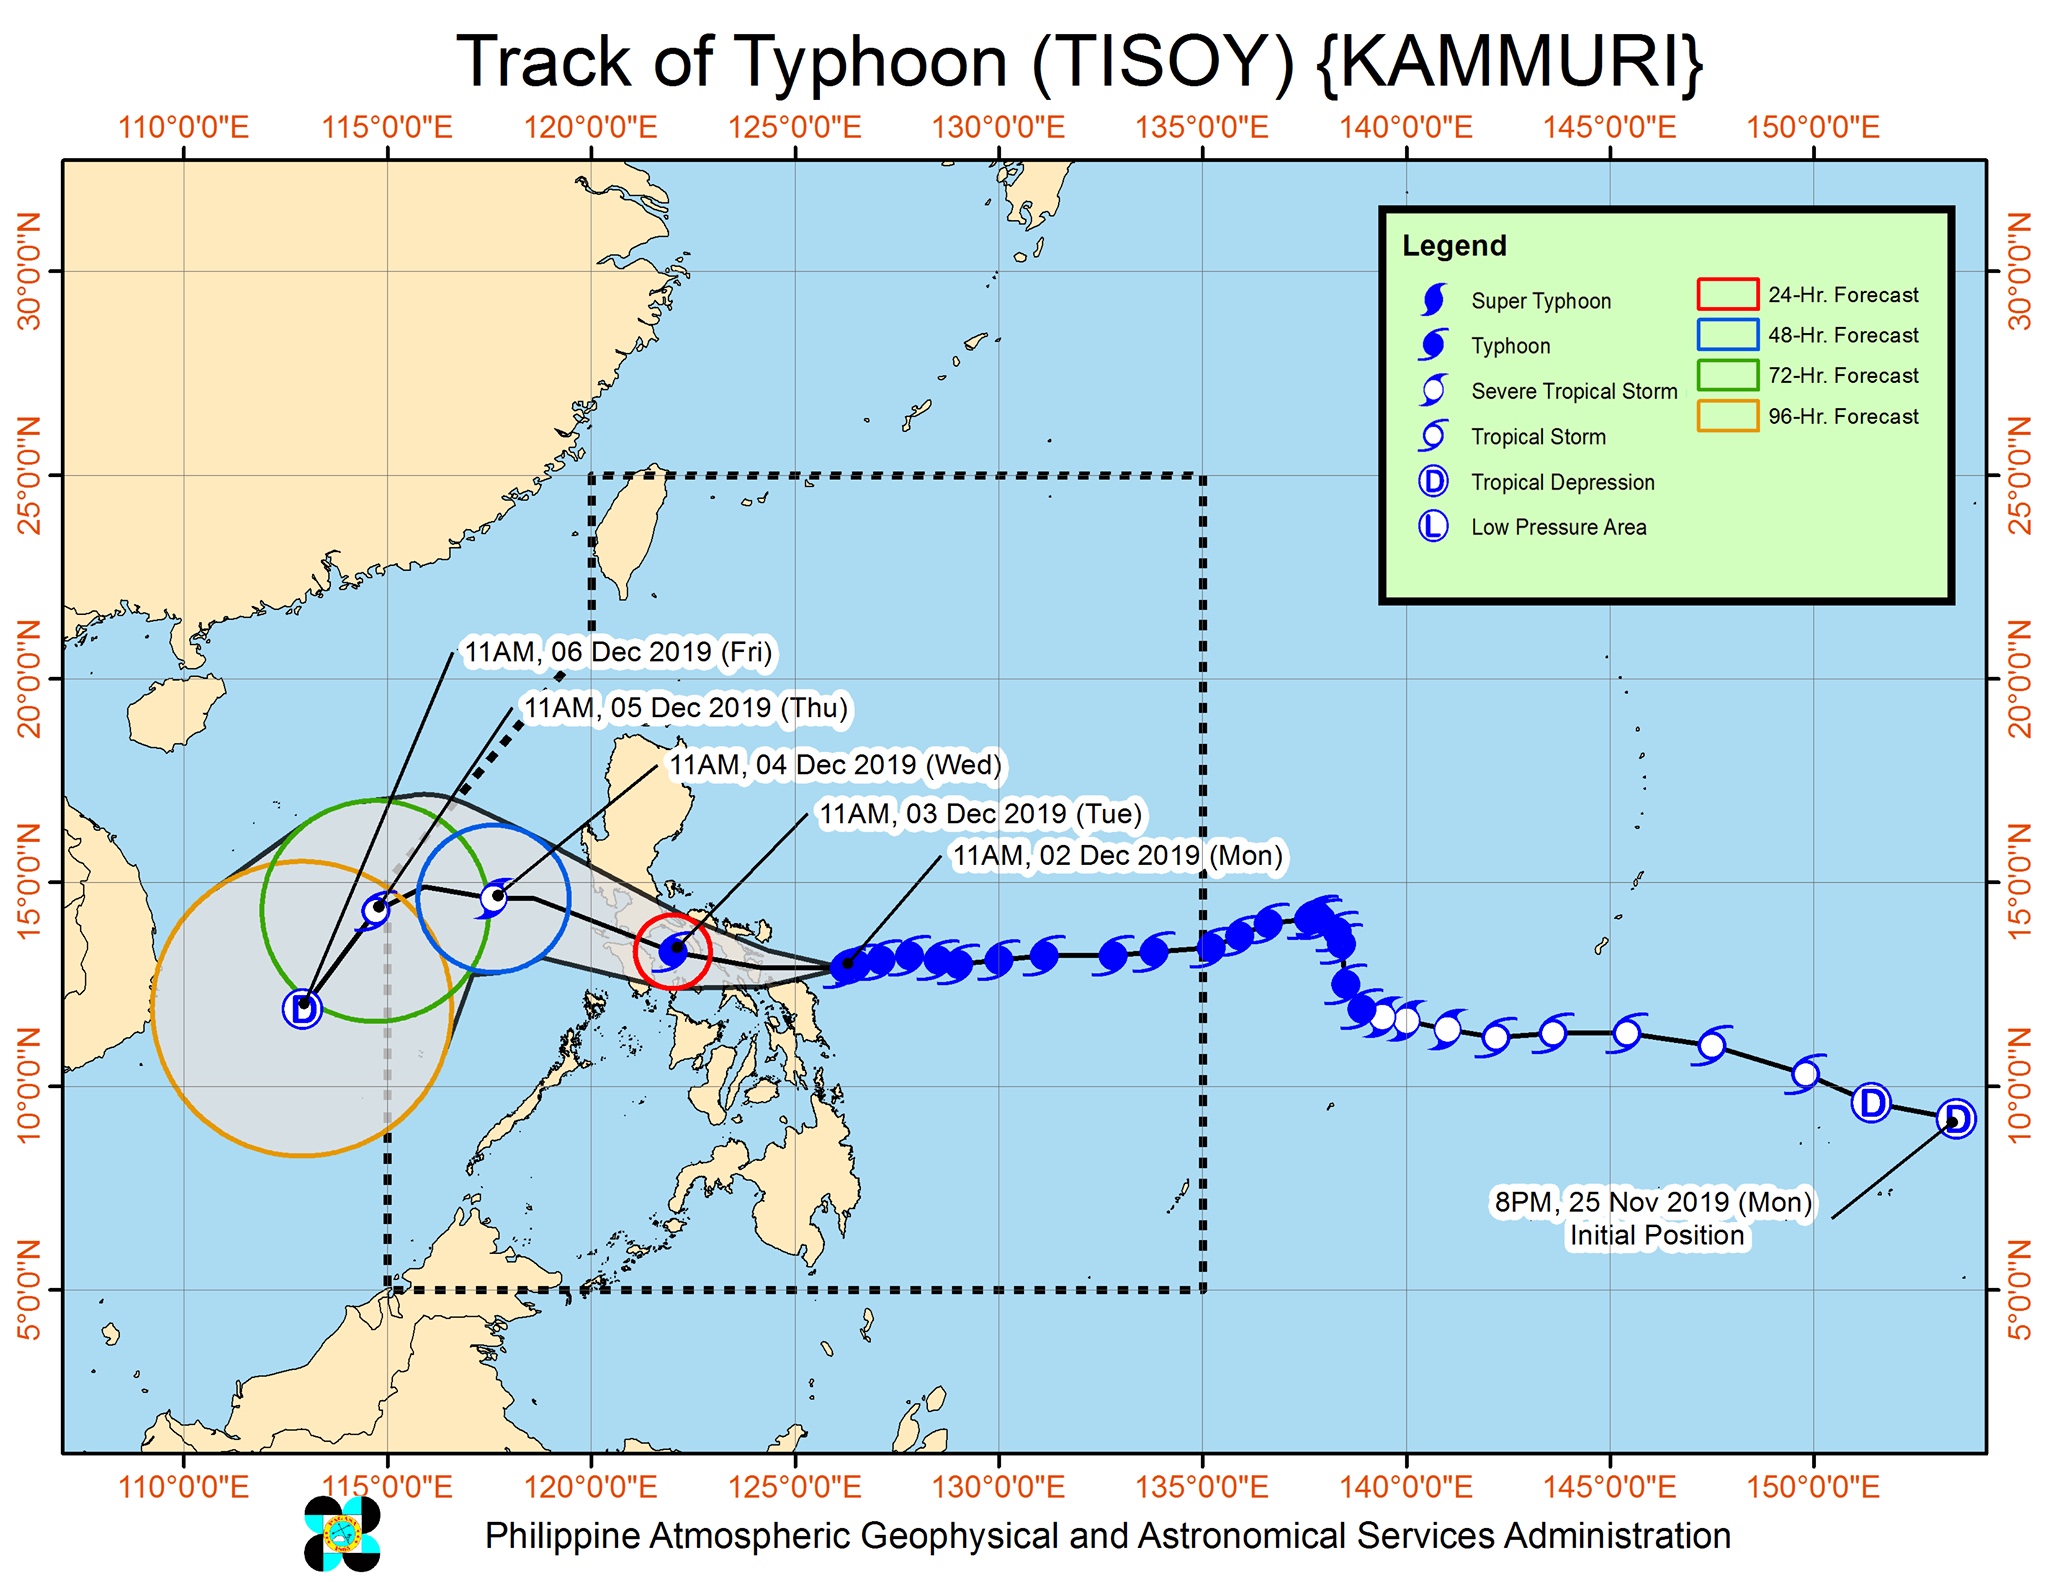 Forecast track of Typhoon Tisoy (Kammuri) as of December 2, 2019, 2 pm. Image from PAGASA 